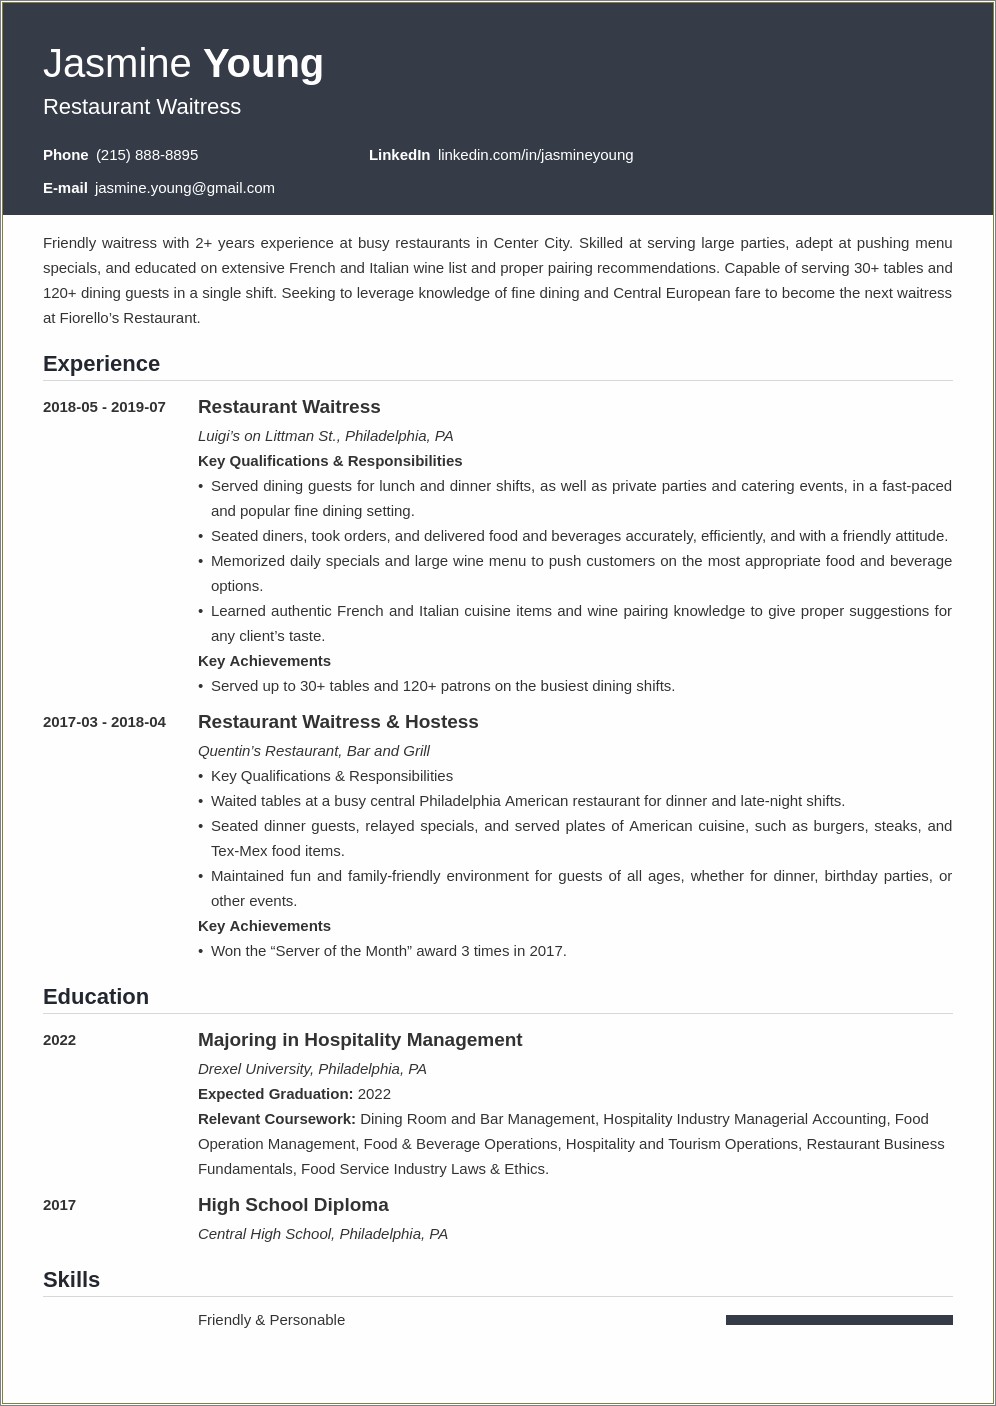 Sample Resume Objective Statement For Food Service